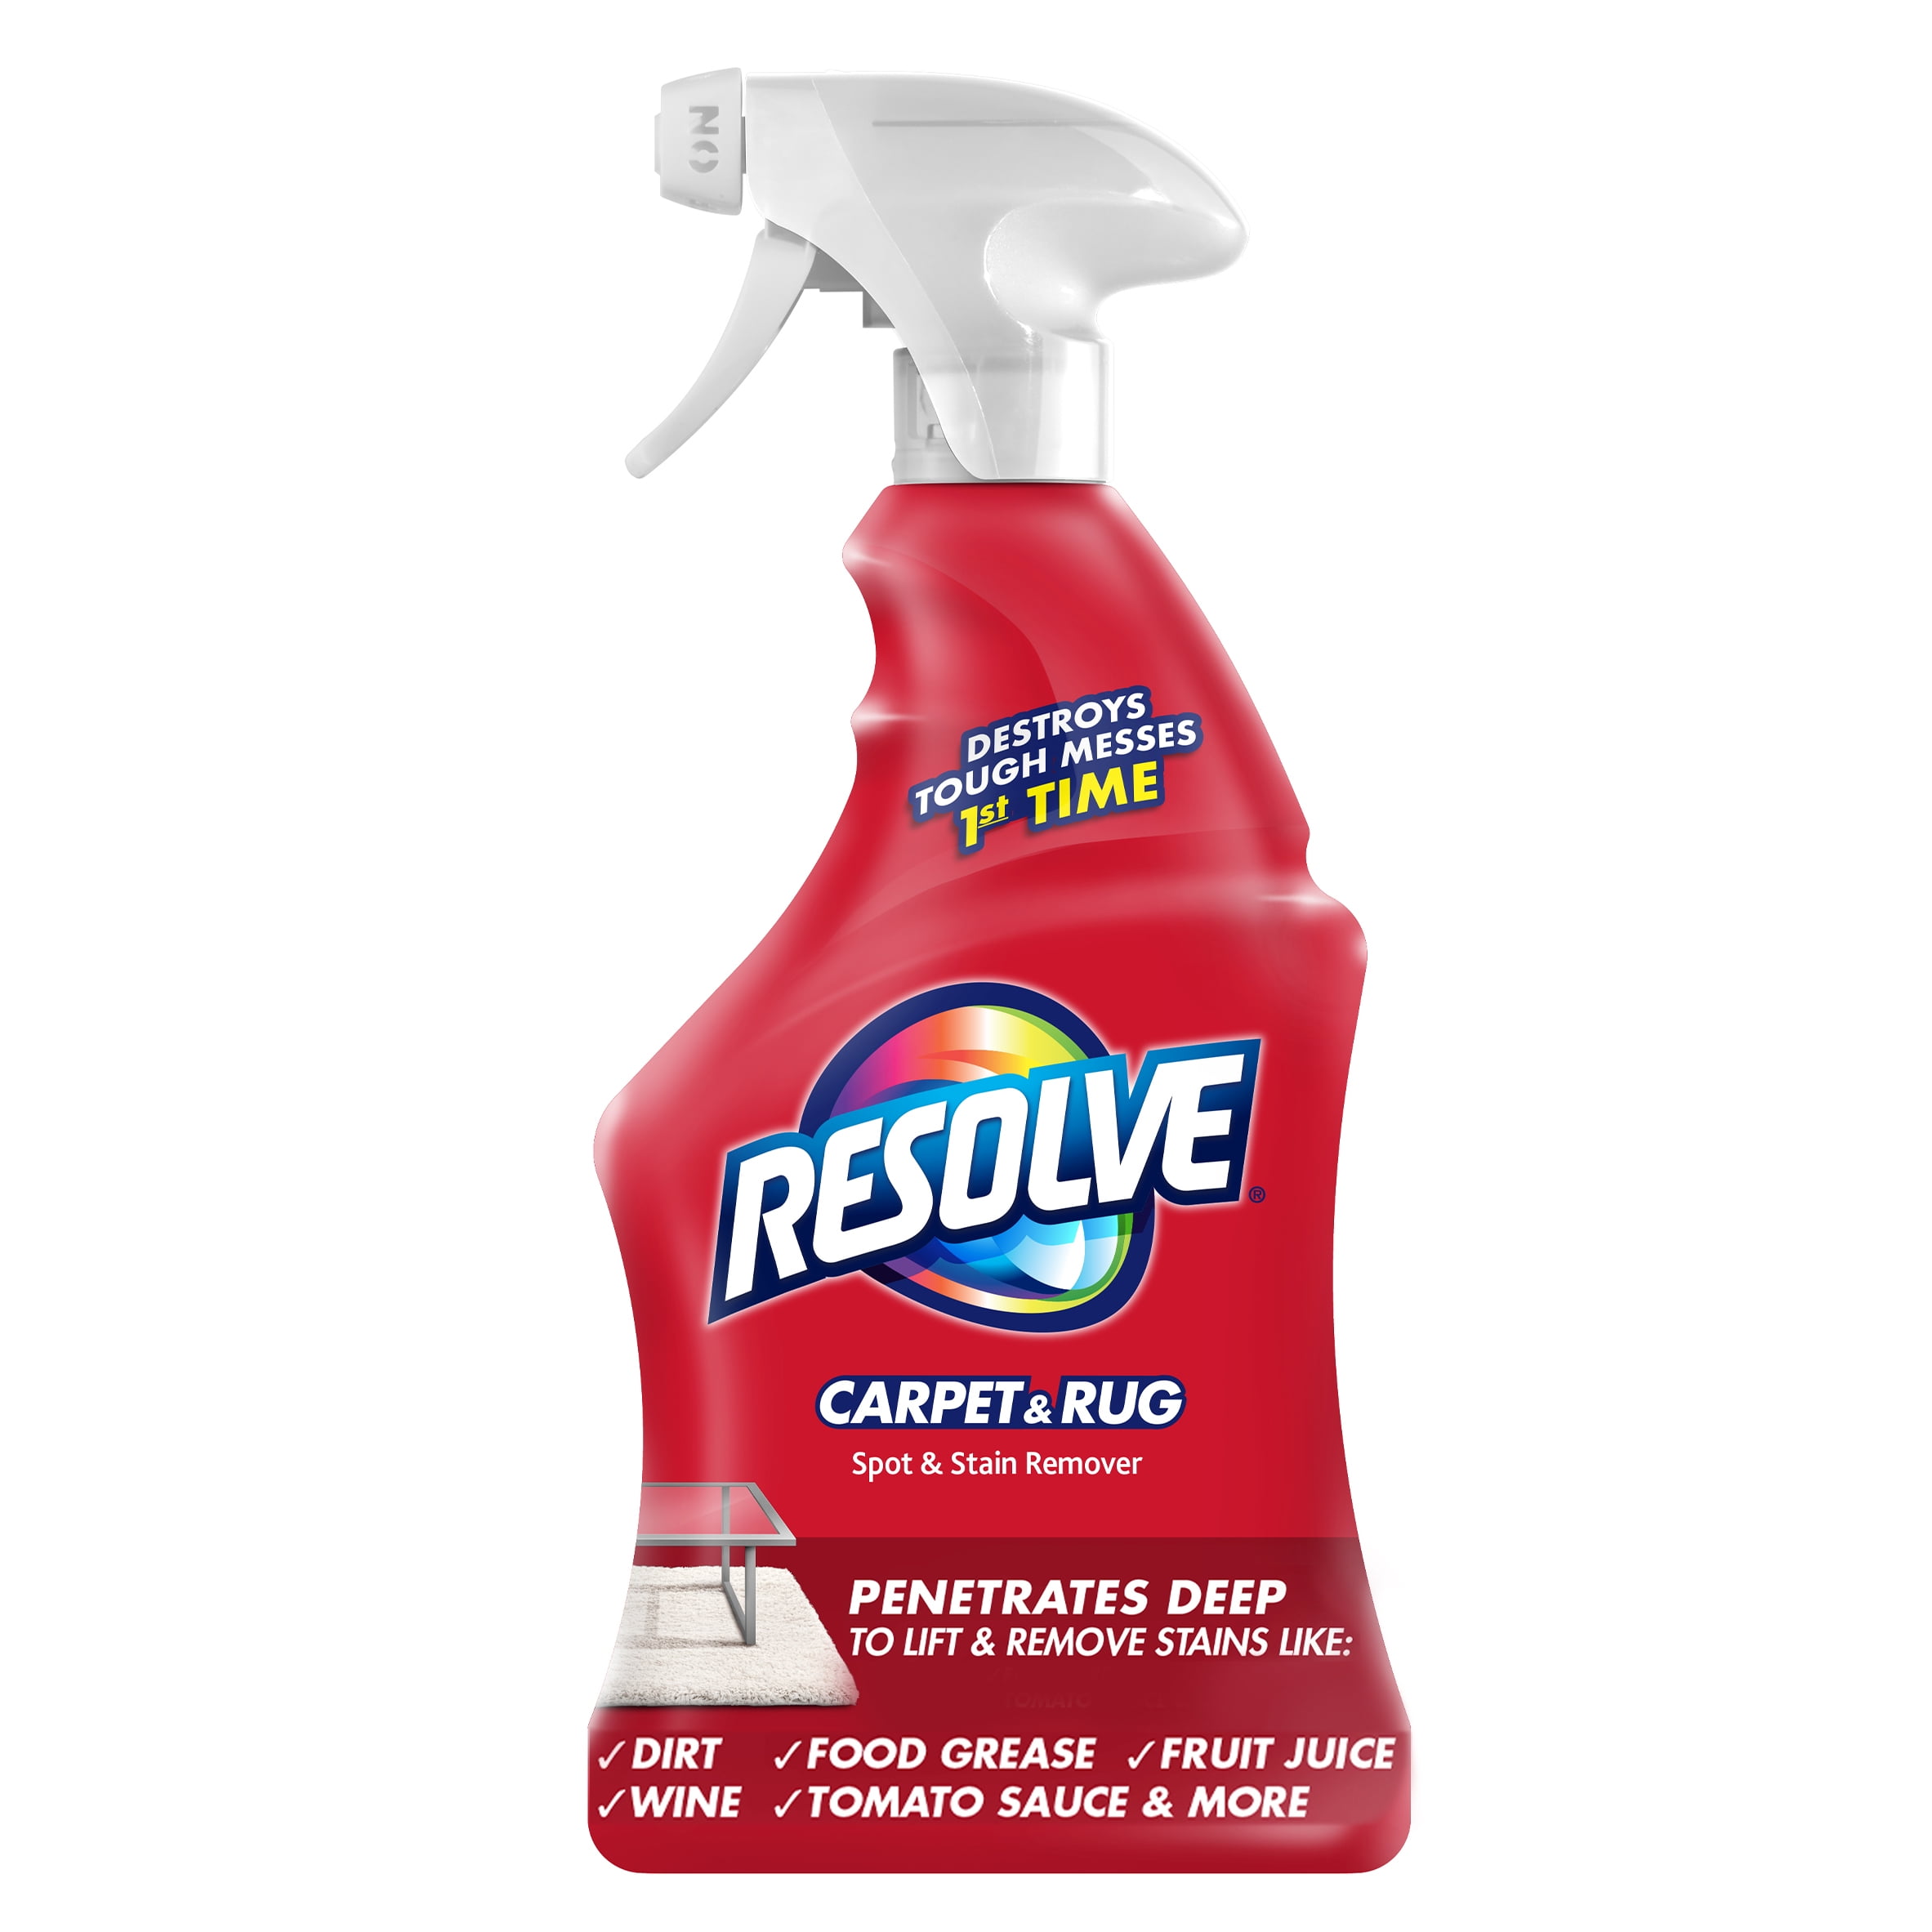  Red Away Red Stain Remover - Tackle Harsh Red Stains